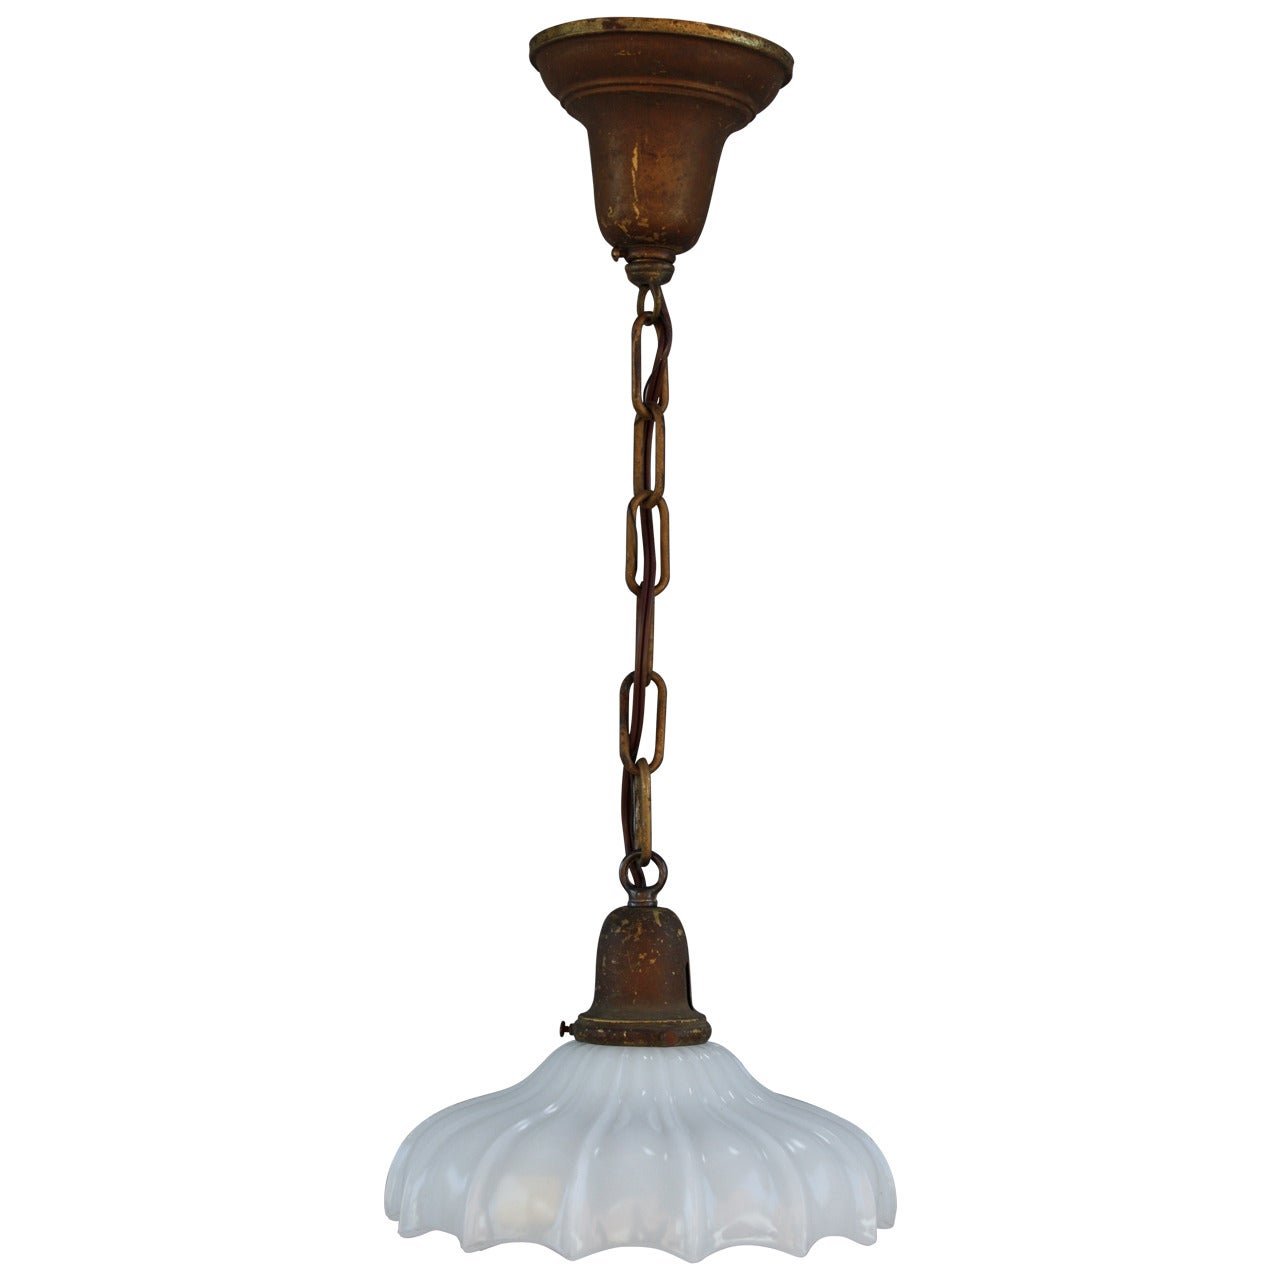 Original 1920s Single Pendant with Glass Shade For Sale